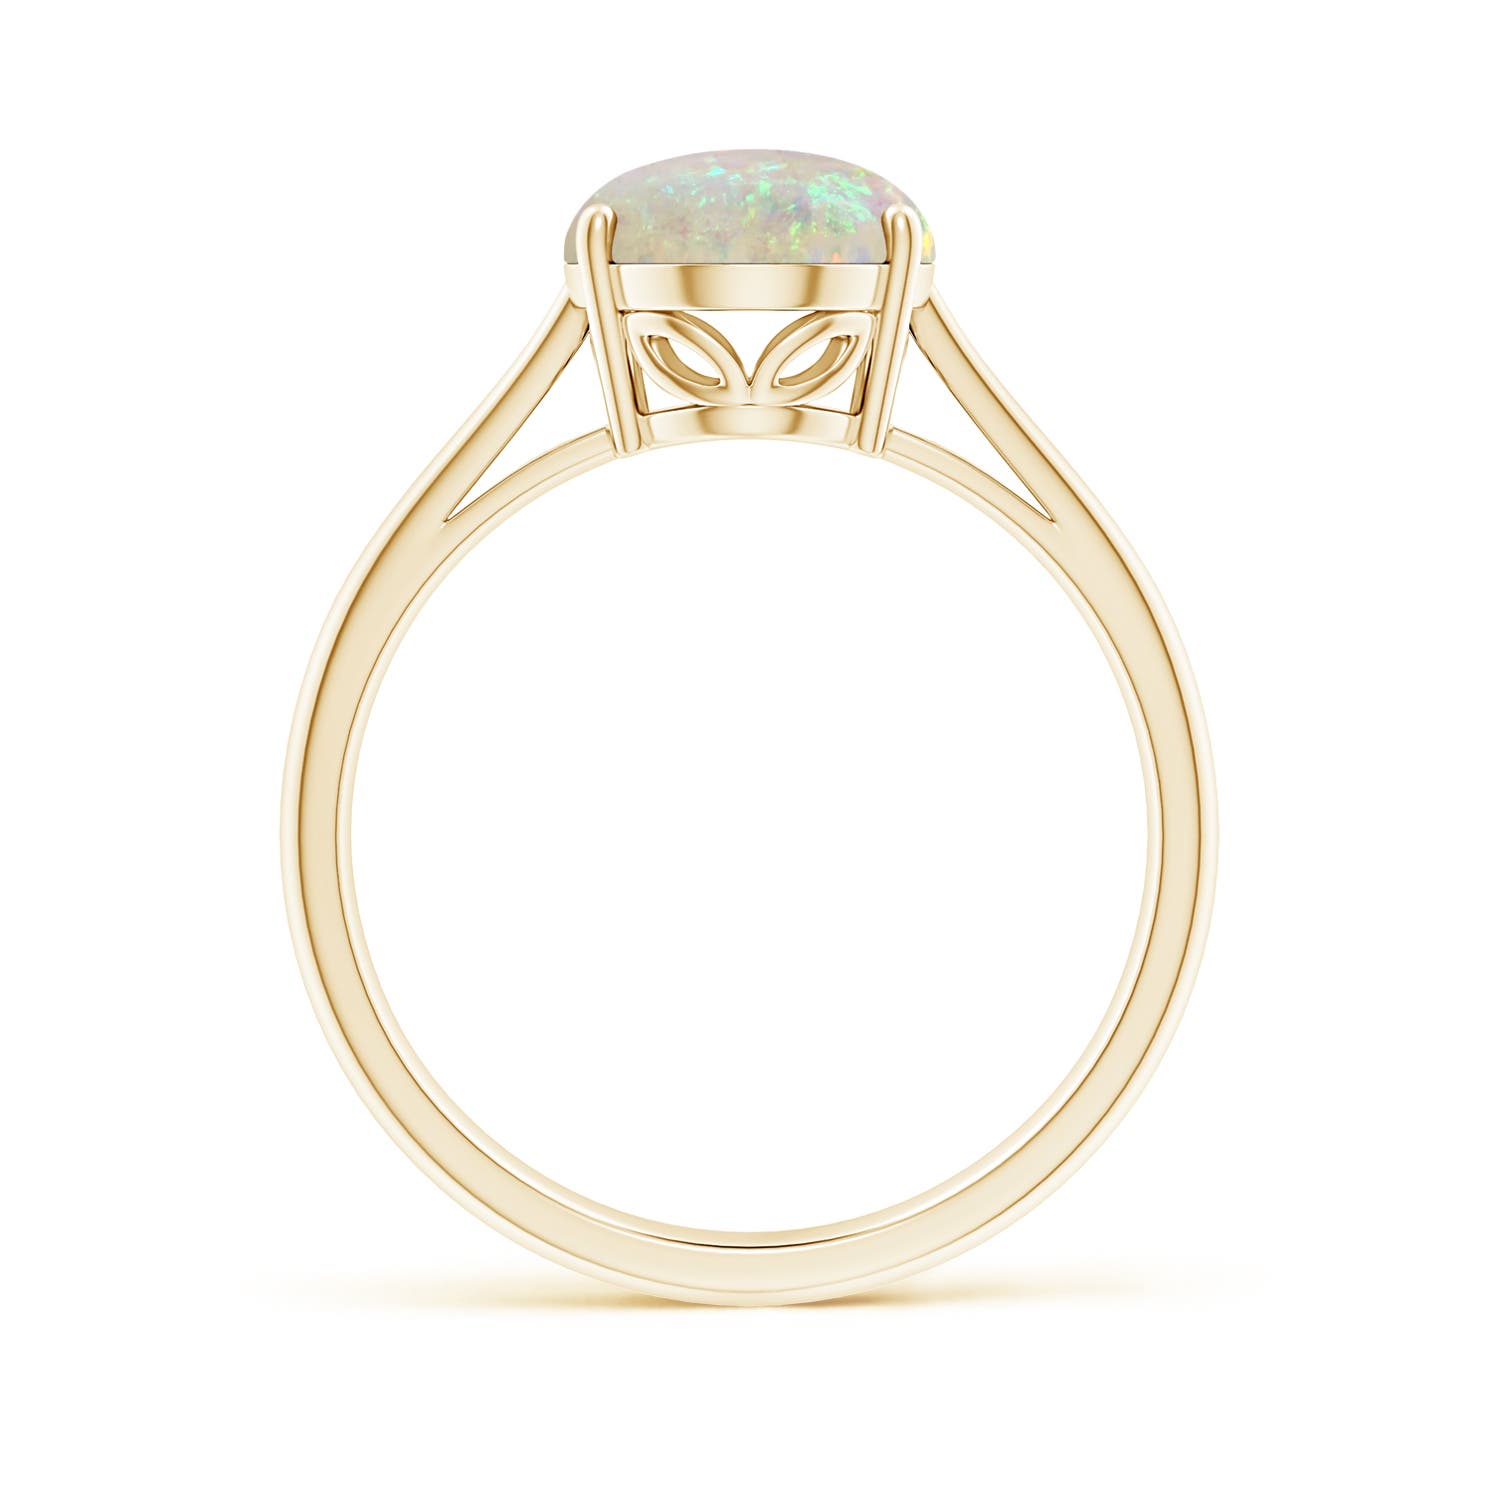 AAA - Opal / 1.45 CT / 14 KT Yellow Gold